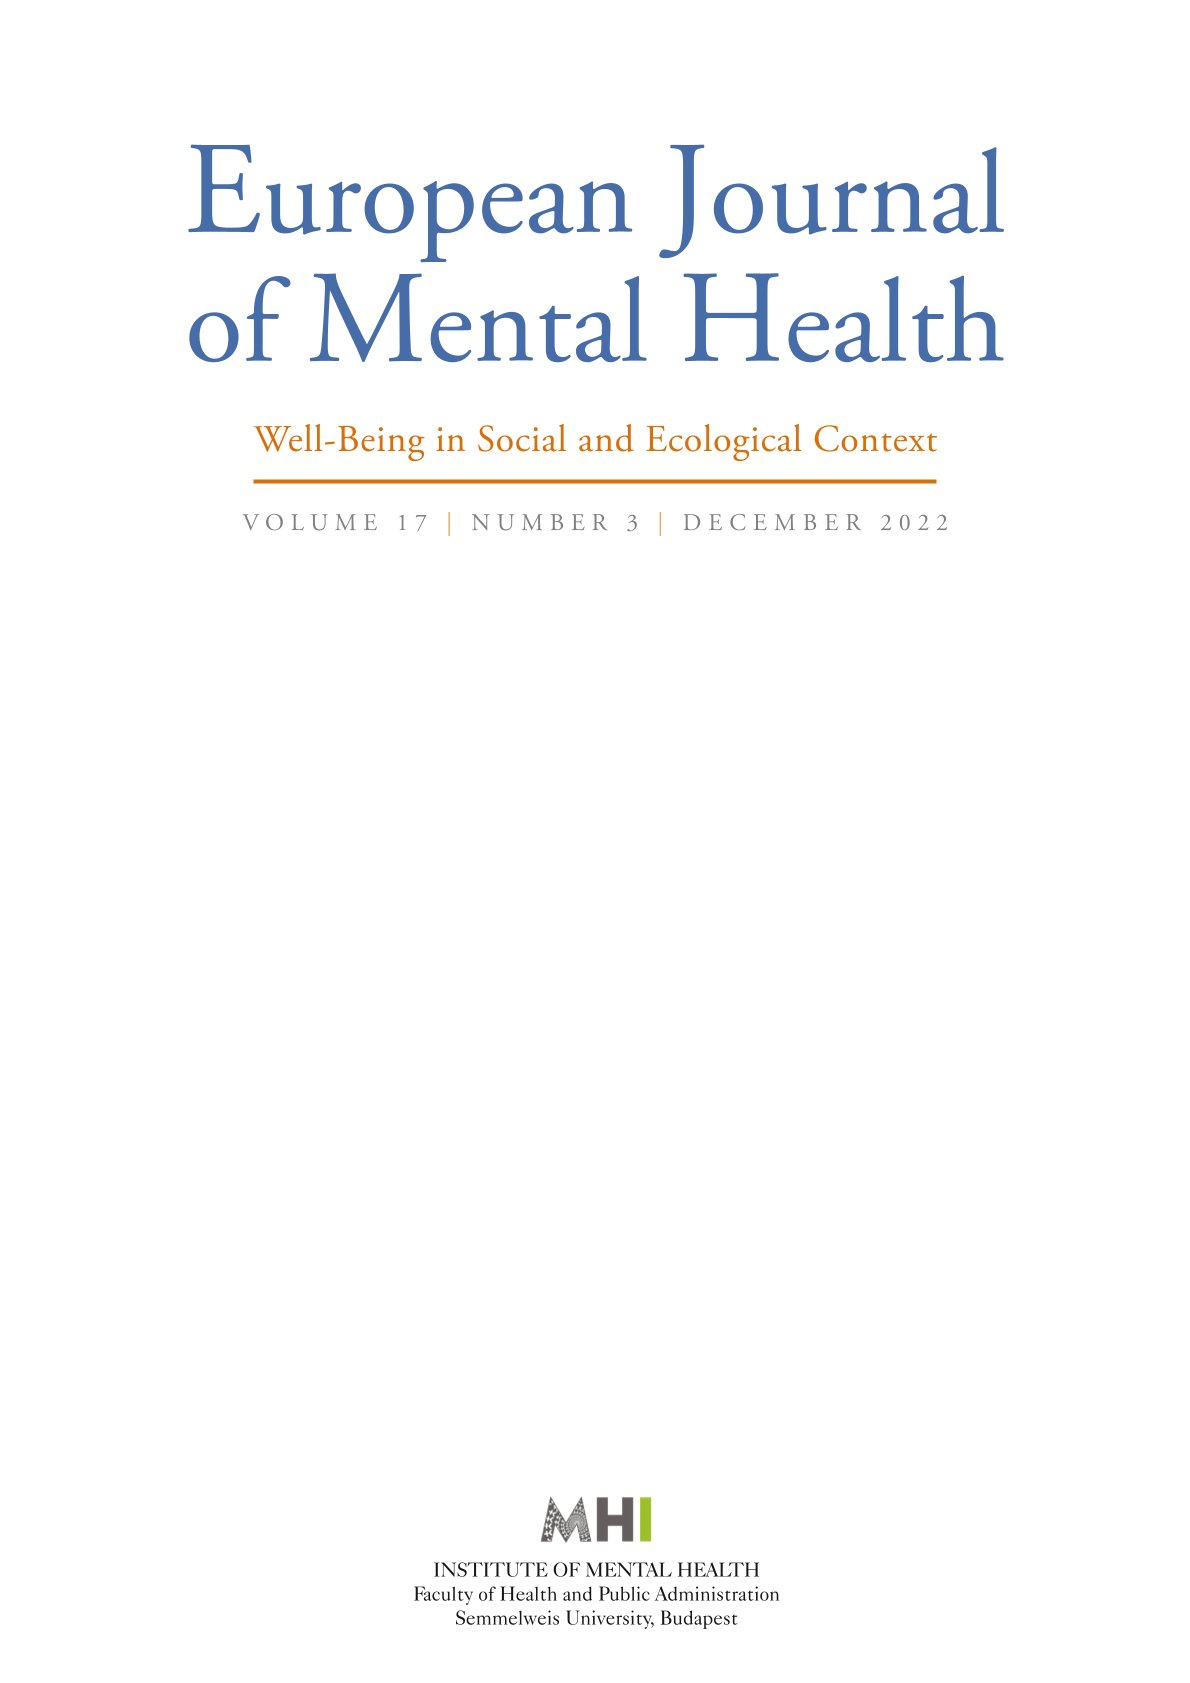 Experiencing Mental Health when Treating Others. Experiences of Mental Health Workers in Relation to Mental Health Problems: Stigma, Perception, and Employment